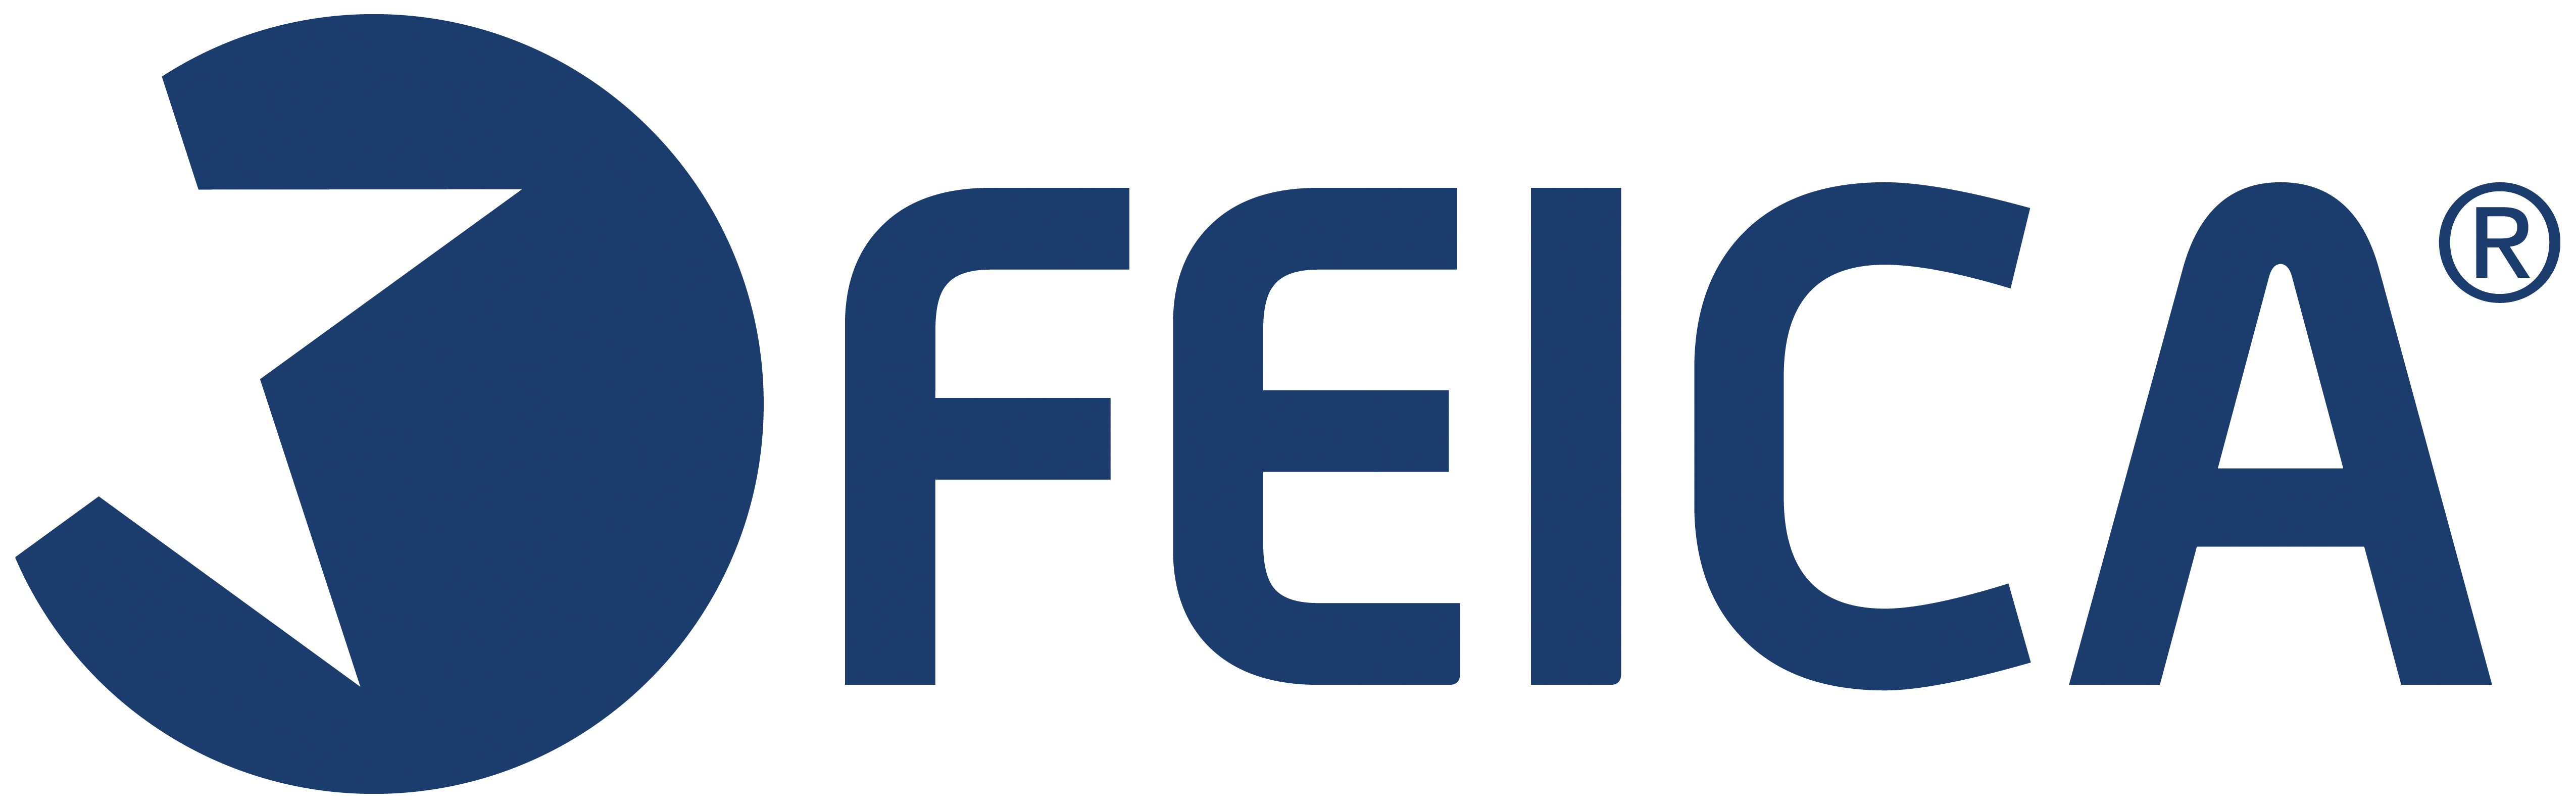 FEICA - Association of the European Adhesive & Sealant Industry